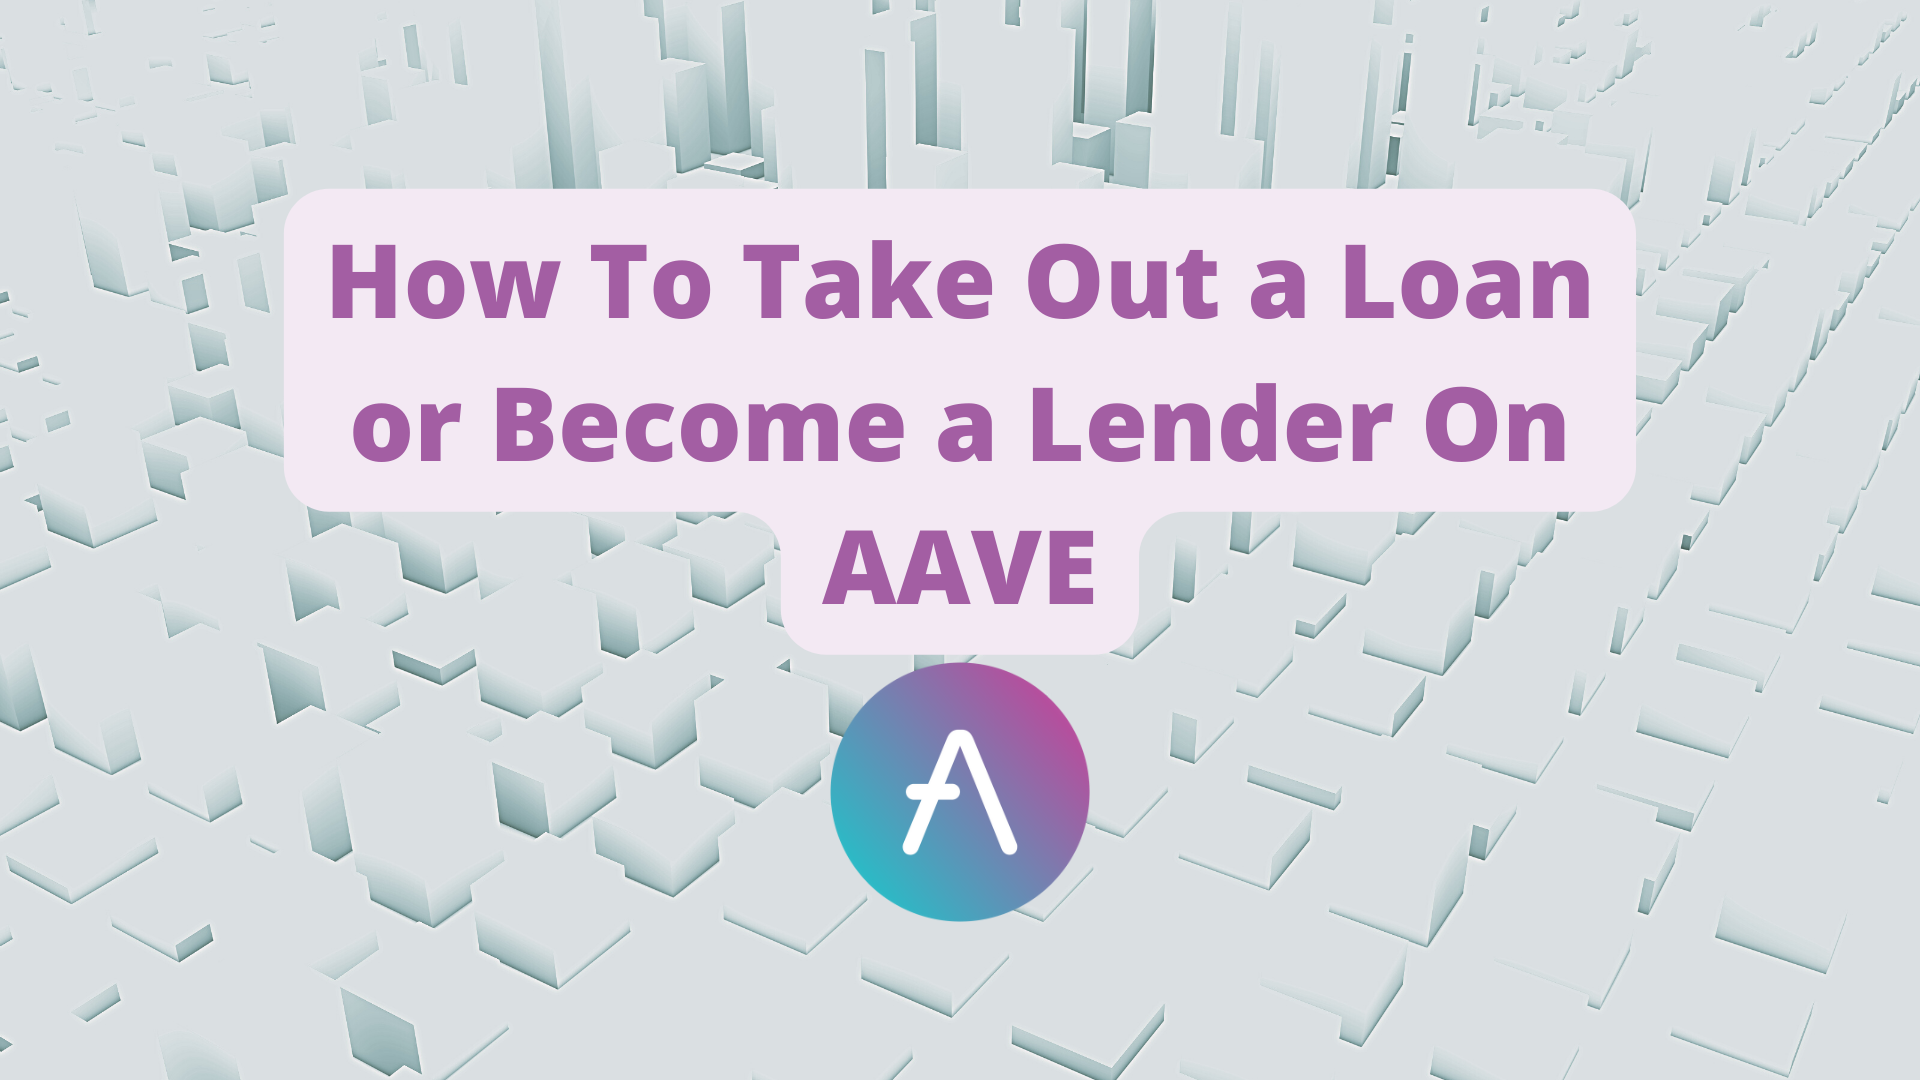 How To Take Out a Loan or Become a Lender On AAVE